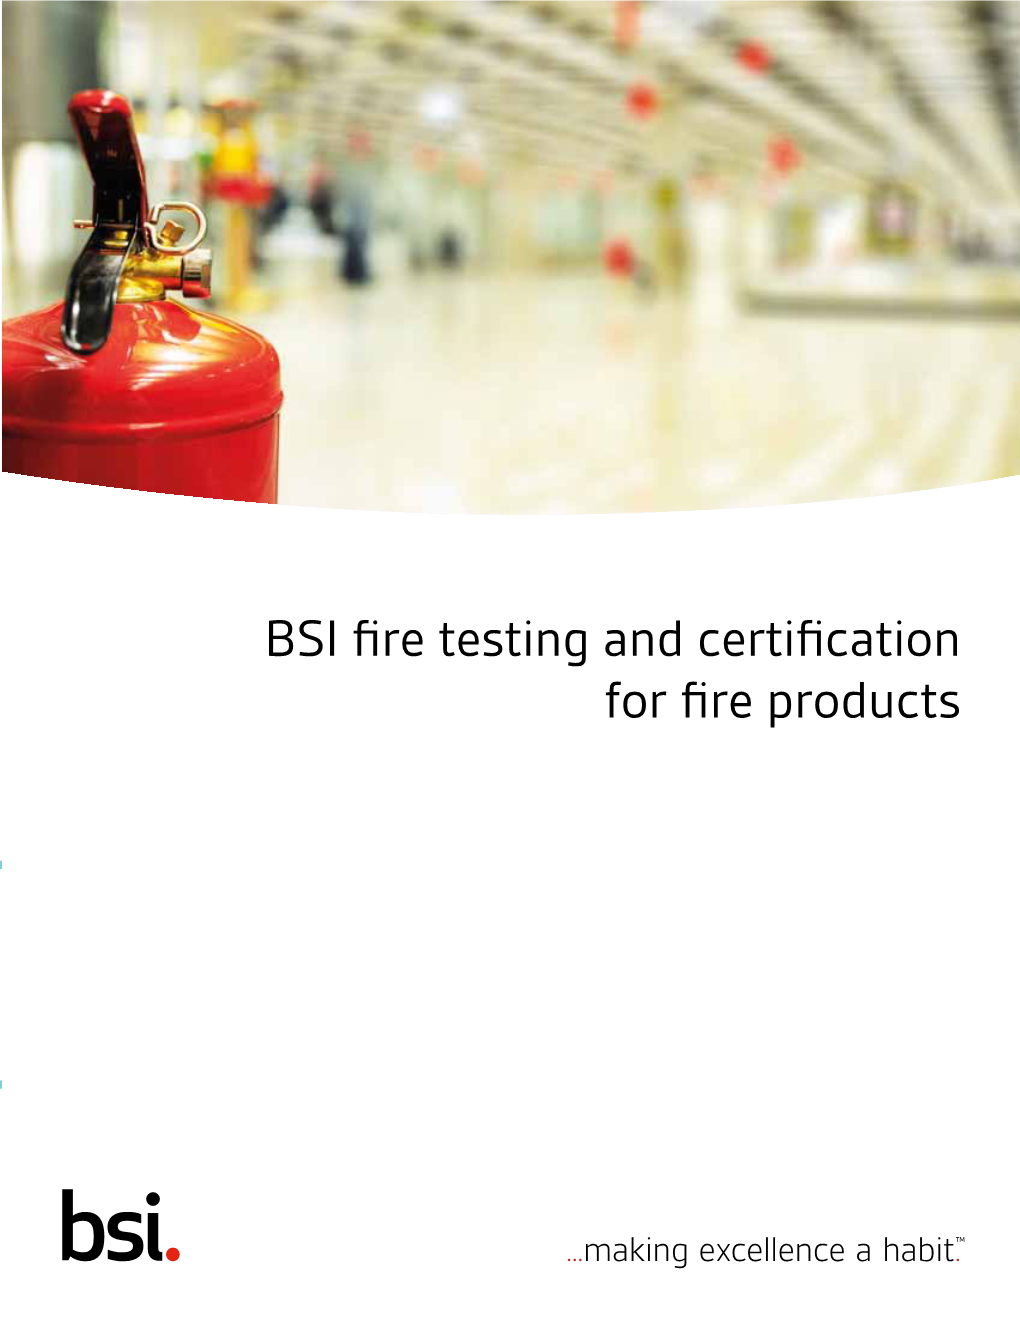 BSI Fire Testing and Certification for Fire Products © BSI Group BSI/USA/536/MS/0516/E Fire Standards – Testing and Certification Service